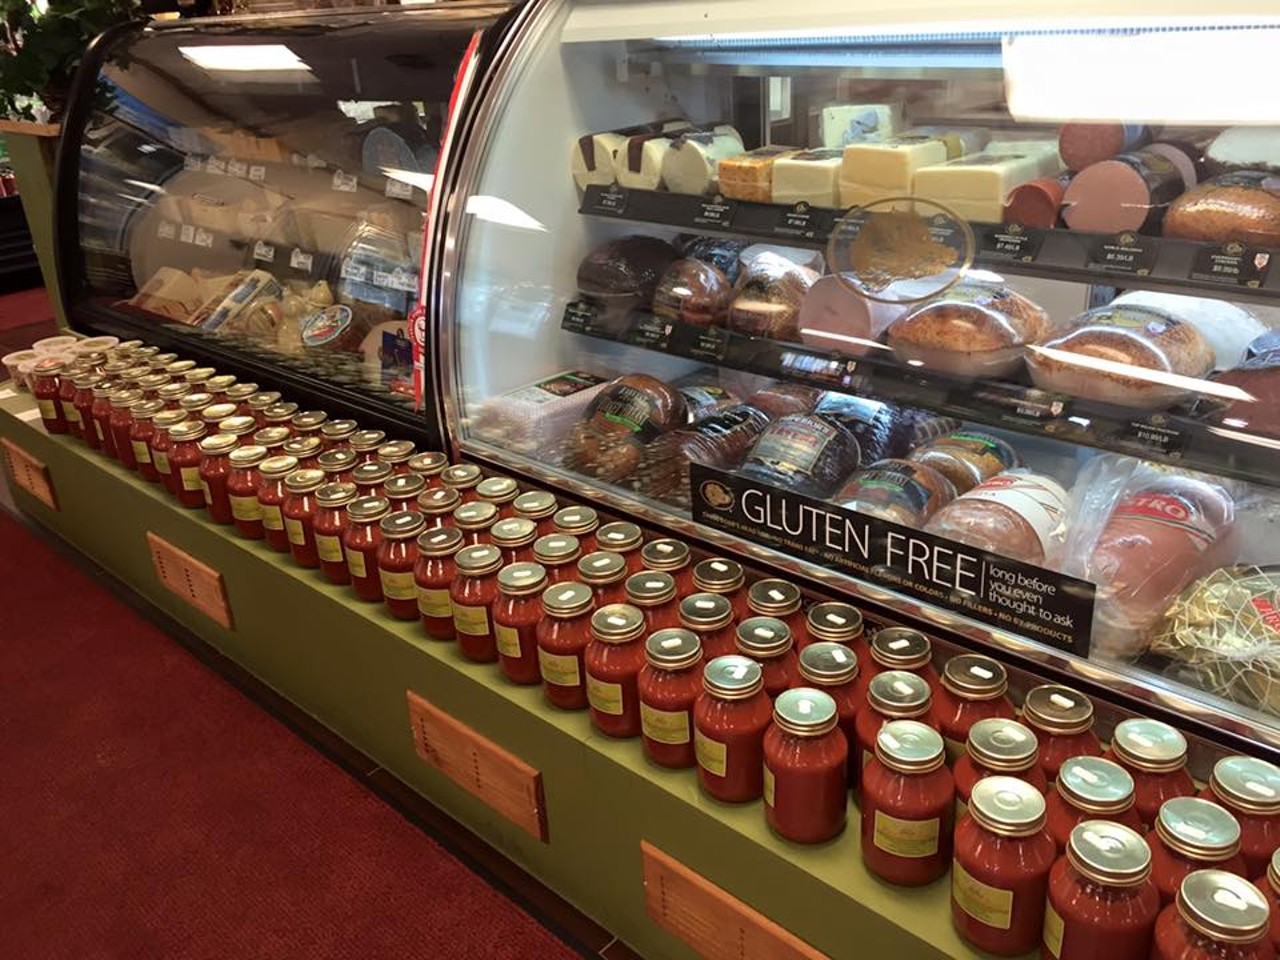 Gentile’s Bakery, Catering and Deli
5626 Broadview Rd.
“Gentiles - awesome Bakery/Deli with carry out sandwiches and pizza.” Read Scene’s review here.
Via Genesisness/Reddit